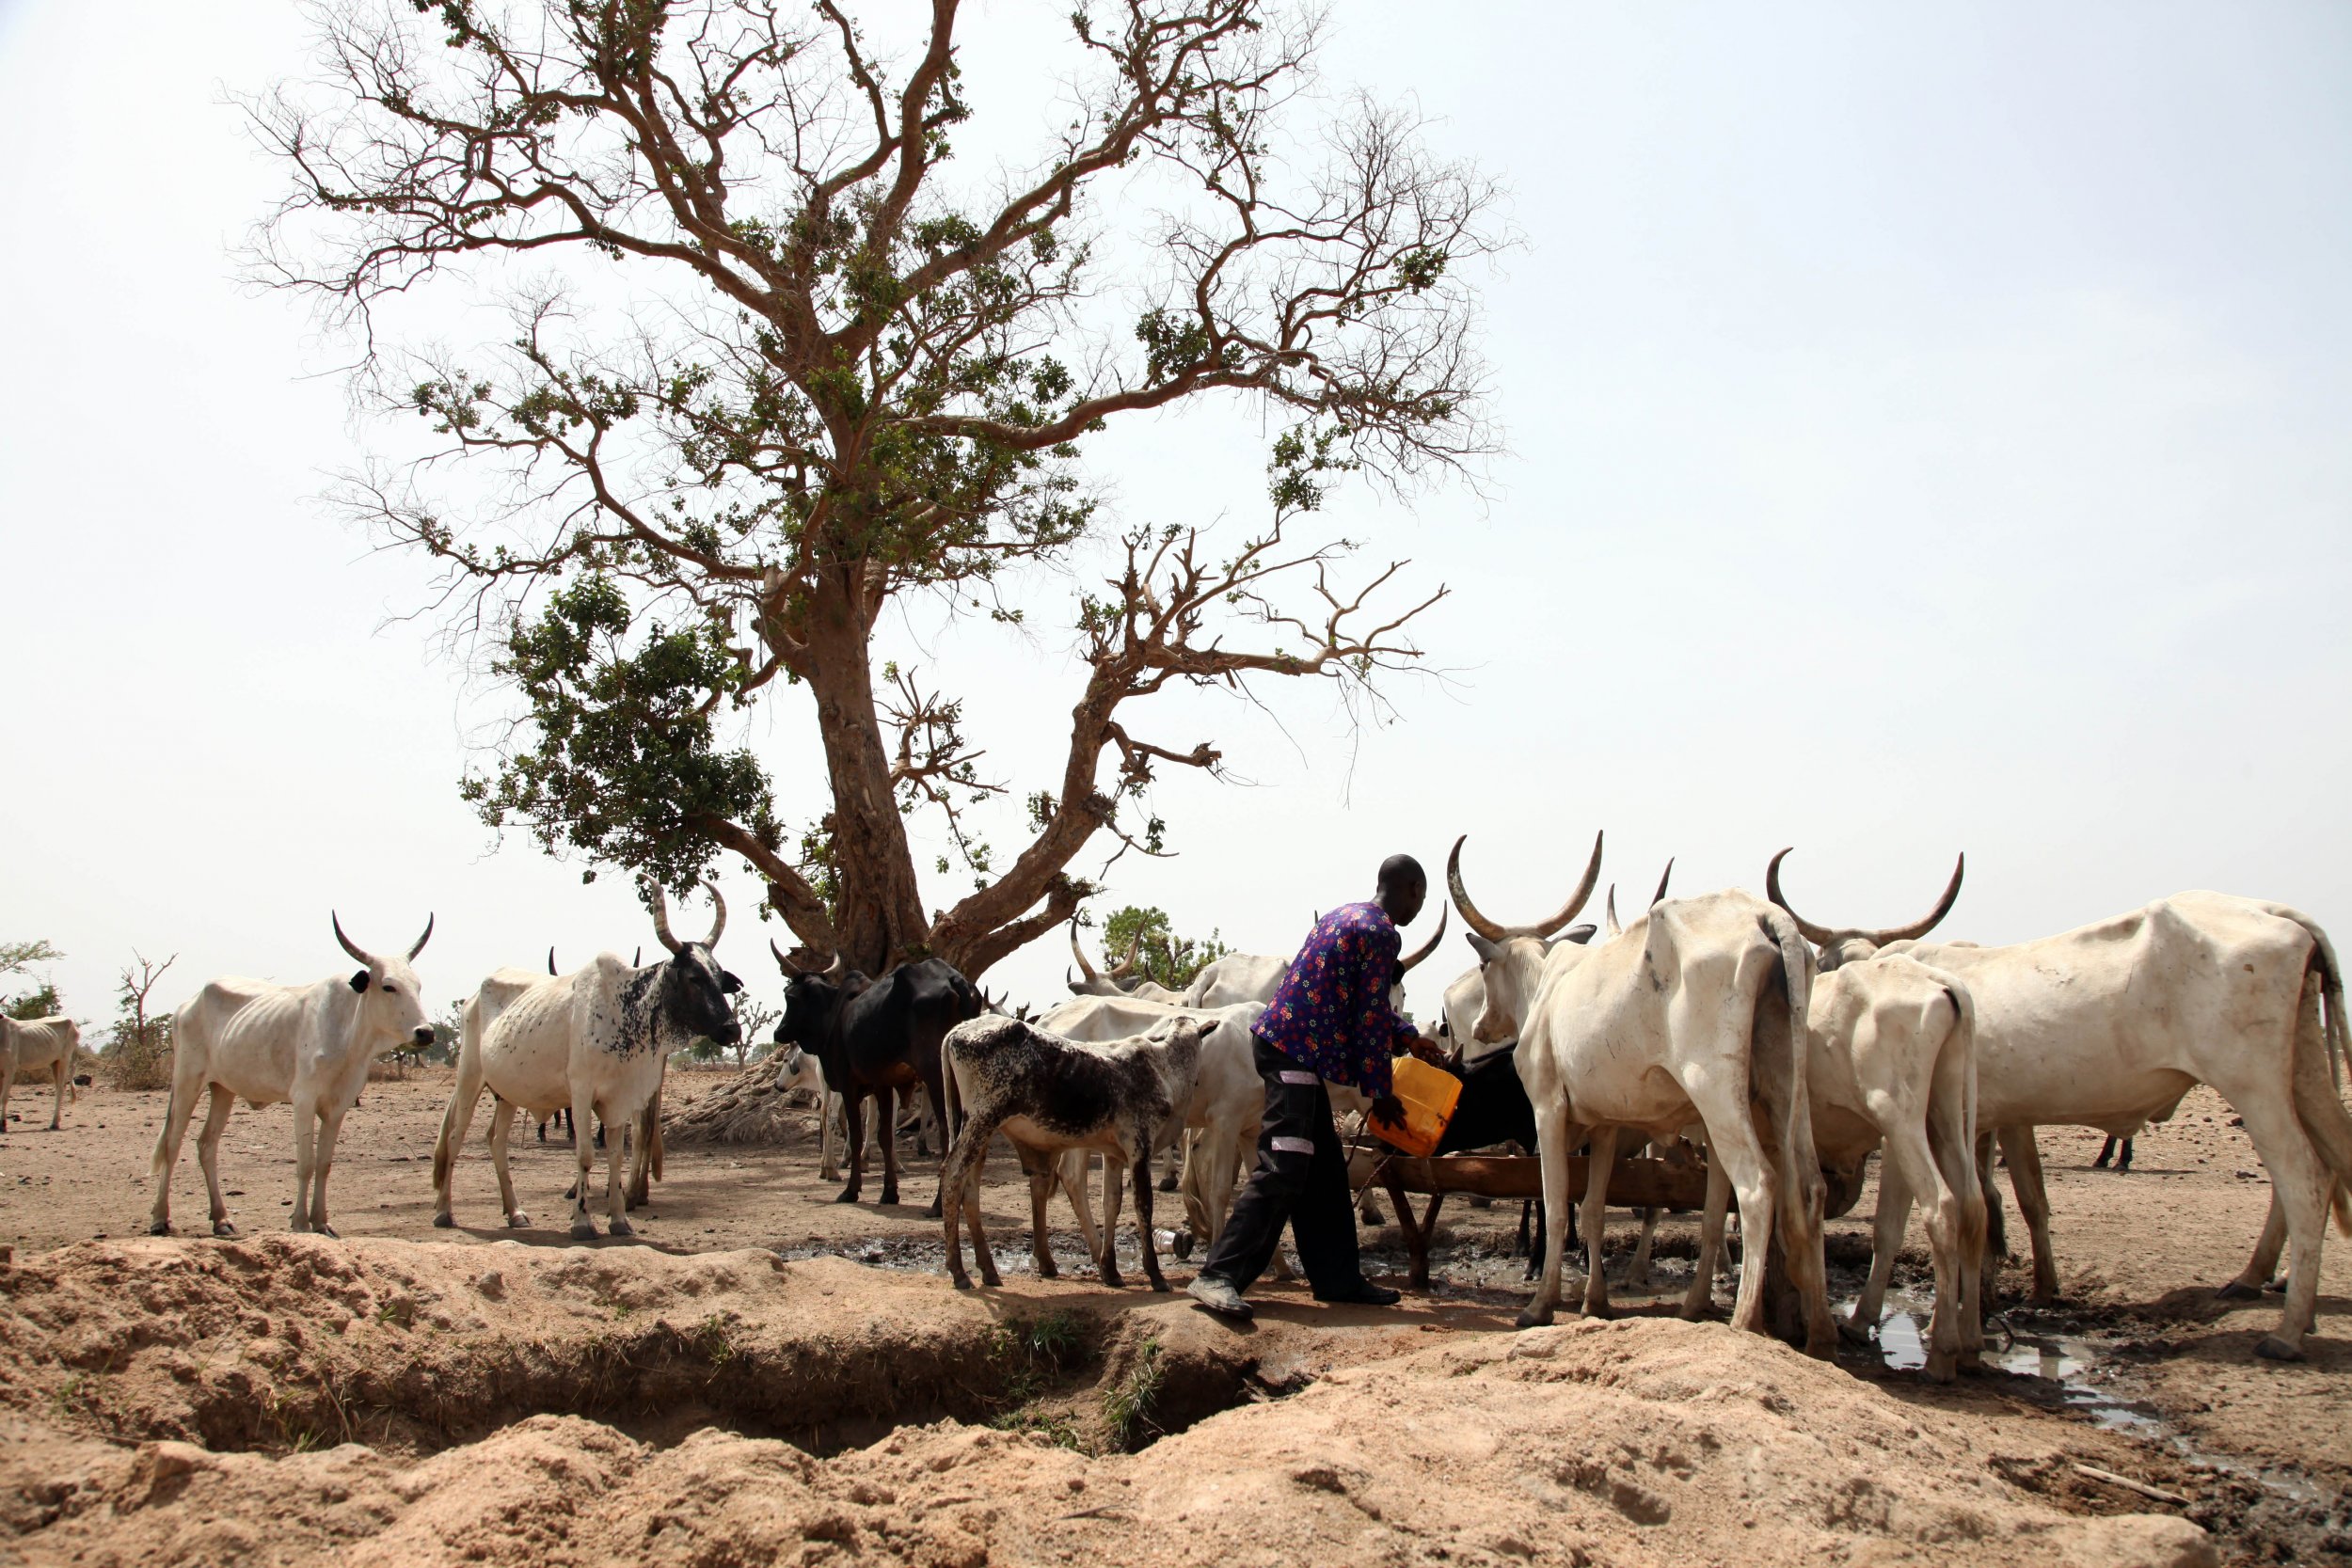 Water Resources Bill Is Another RUGA Policy – YOV